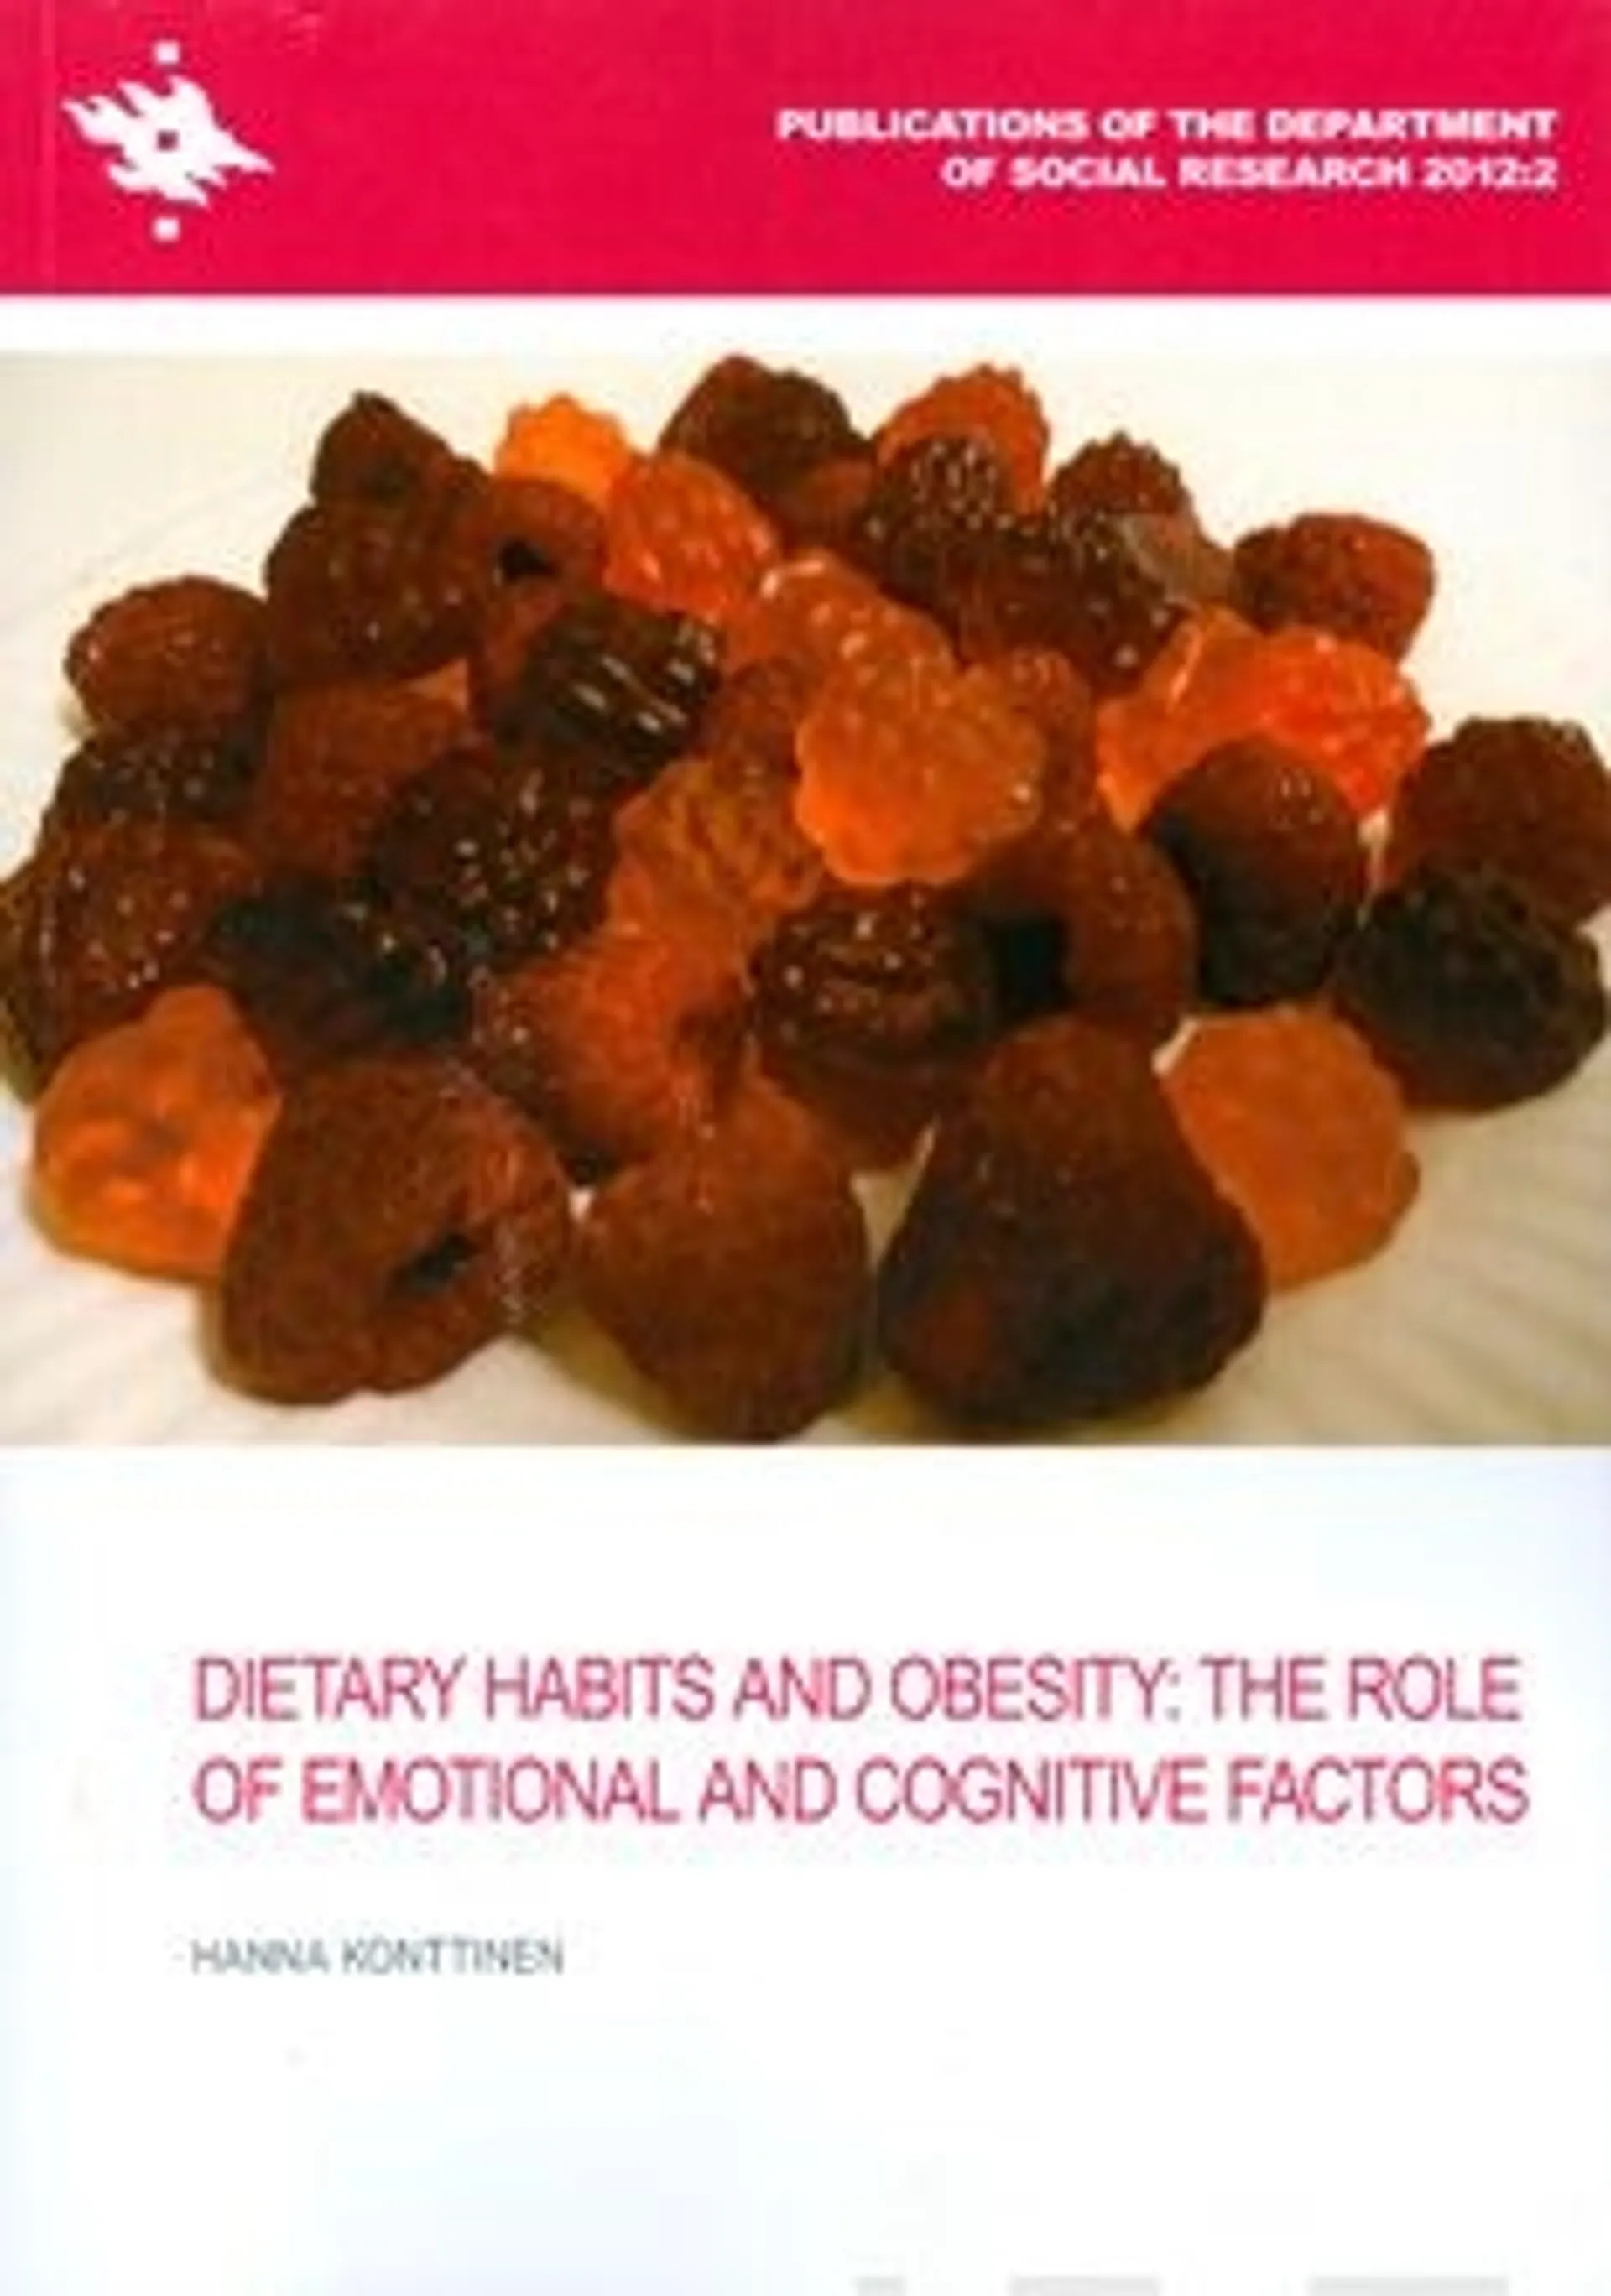 Konttinen, Dietary Habits and Obesity